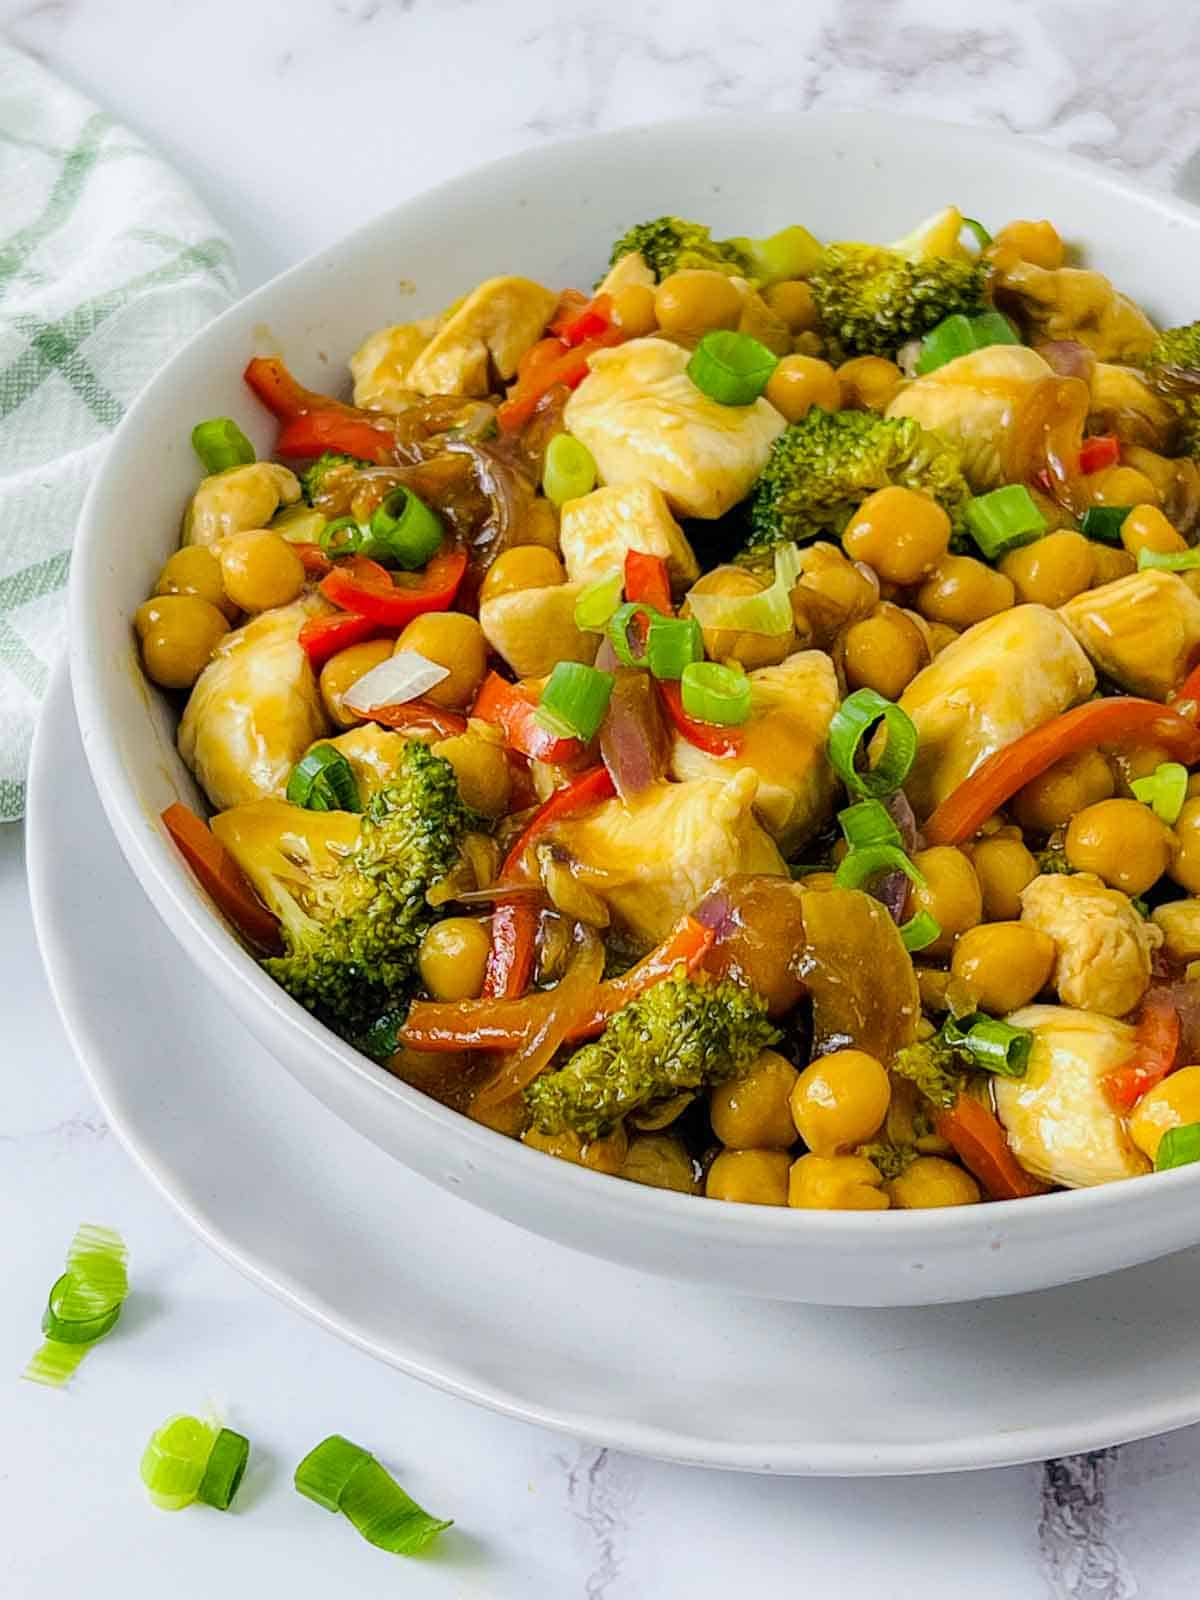 A bowl of chicken chickpea stir fry.